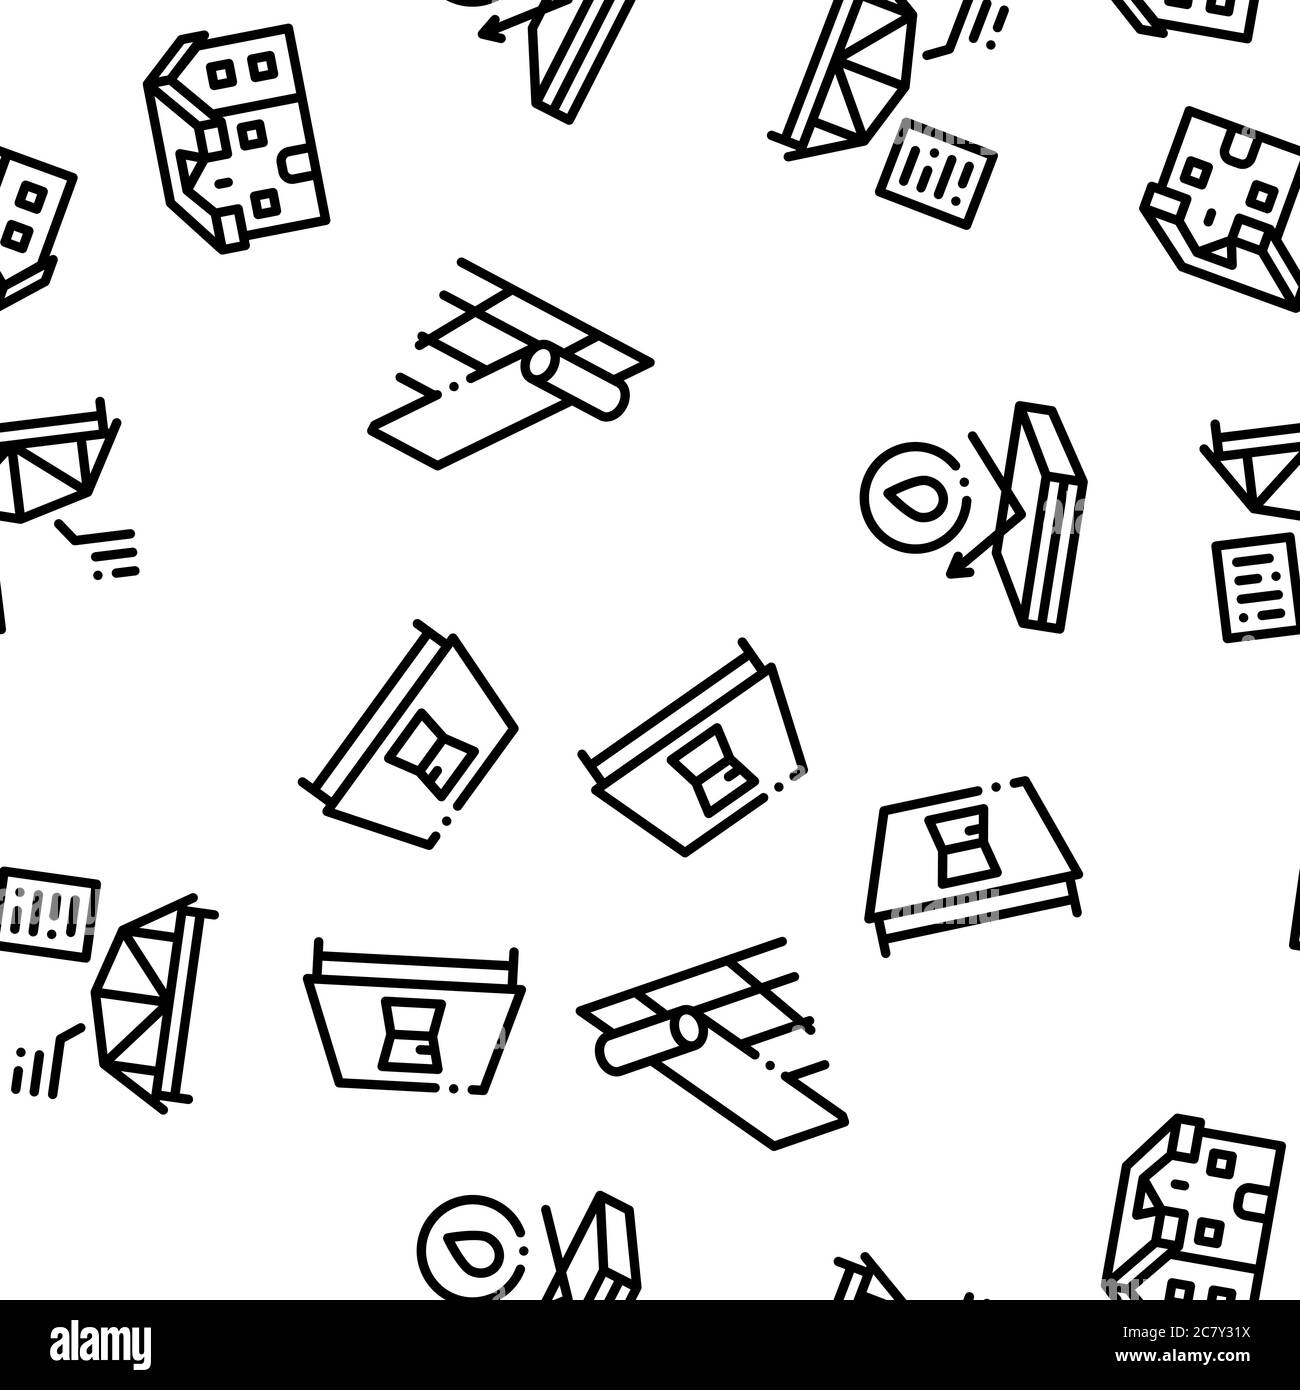 Roof Housetop Material Seamless Pattern Vector Stock Vector